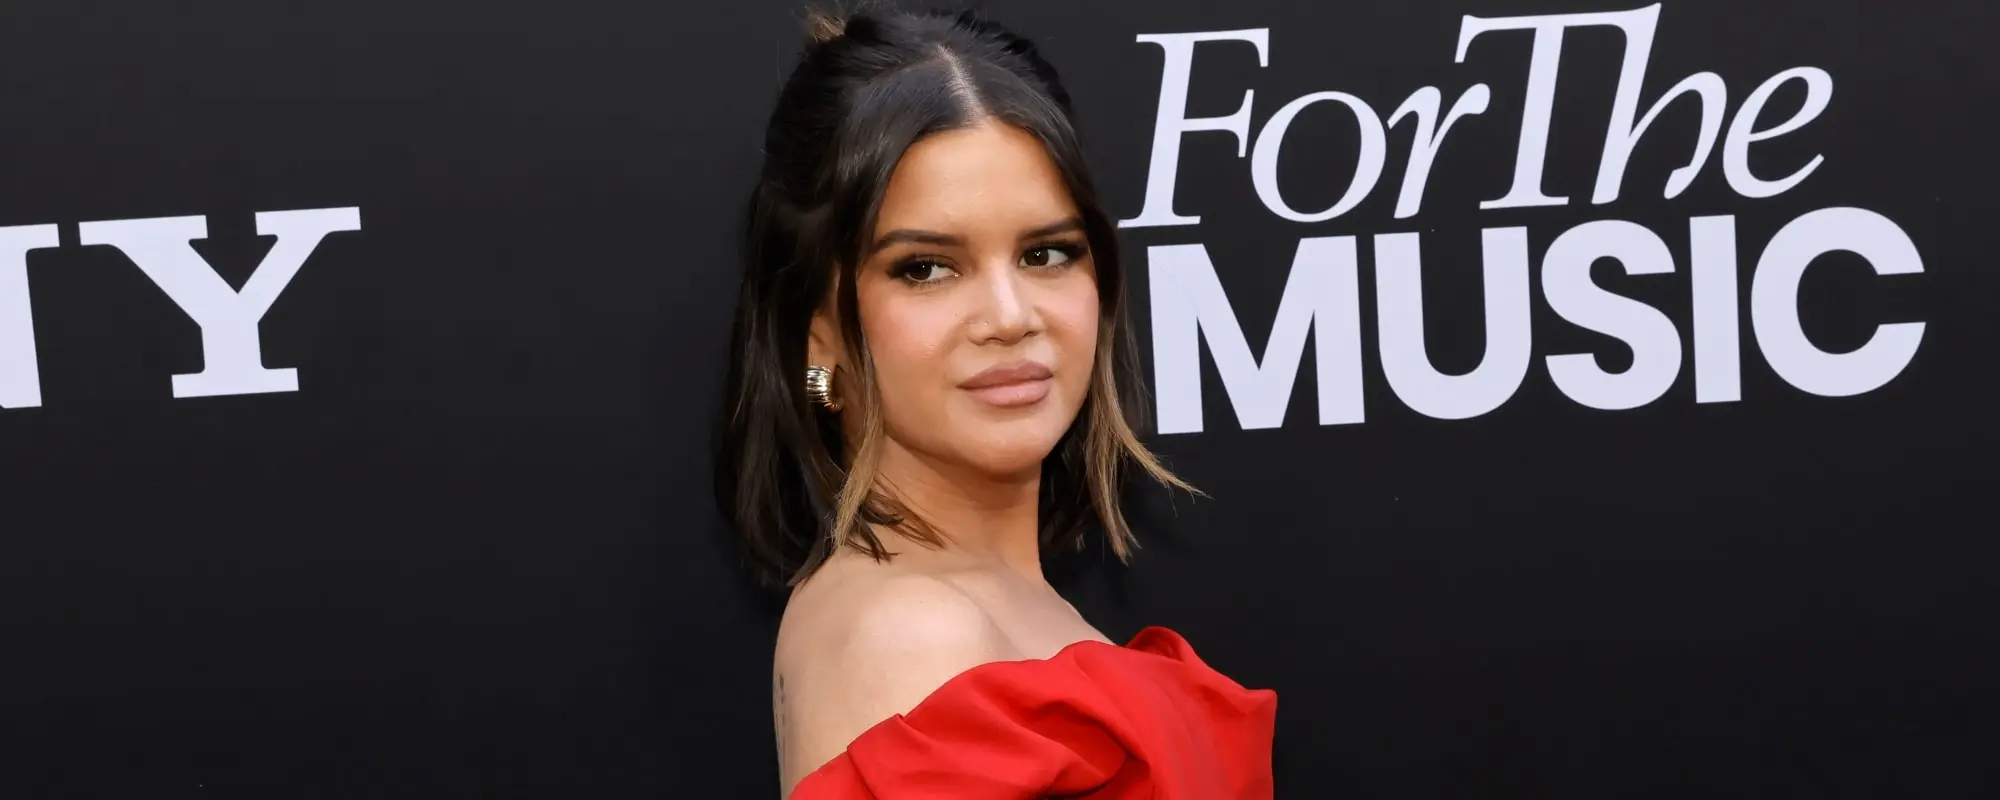 Maren Morris Teases Unreleased Song: “New Hymn for the New Year”